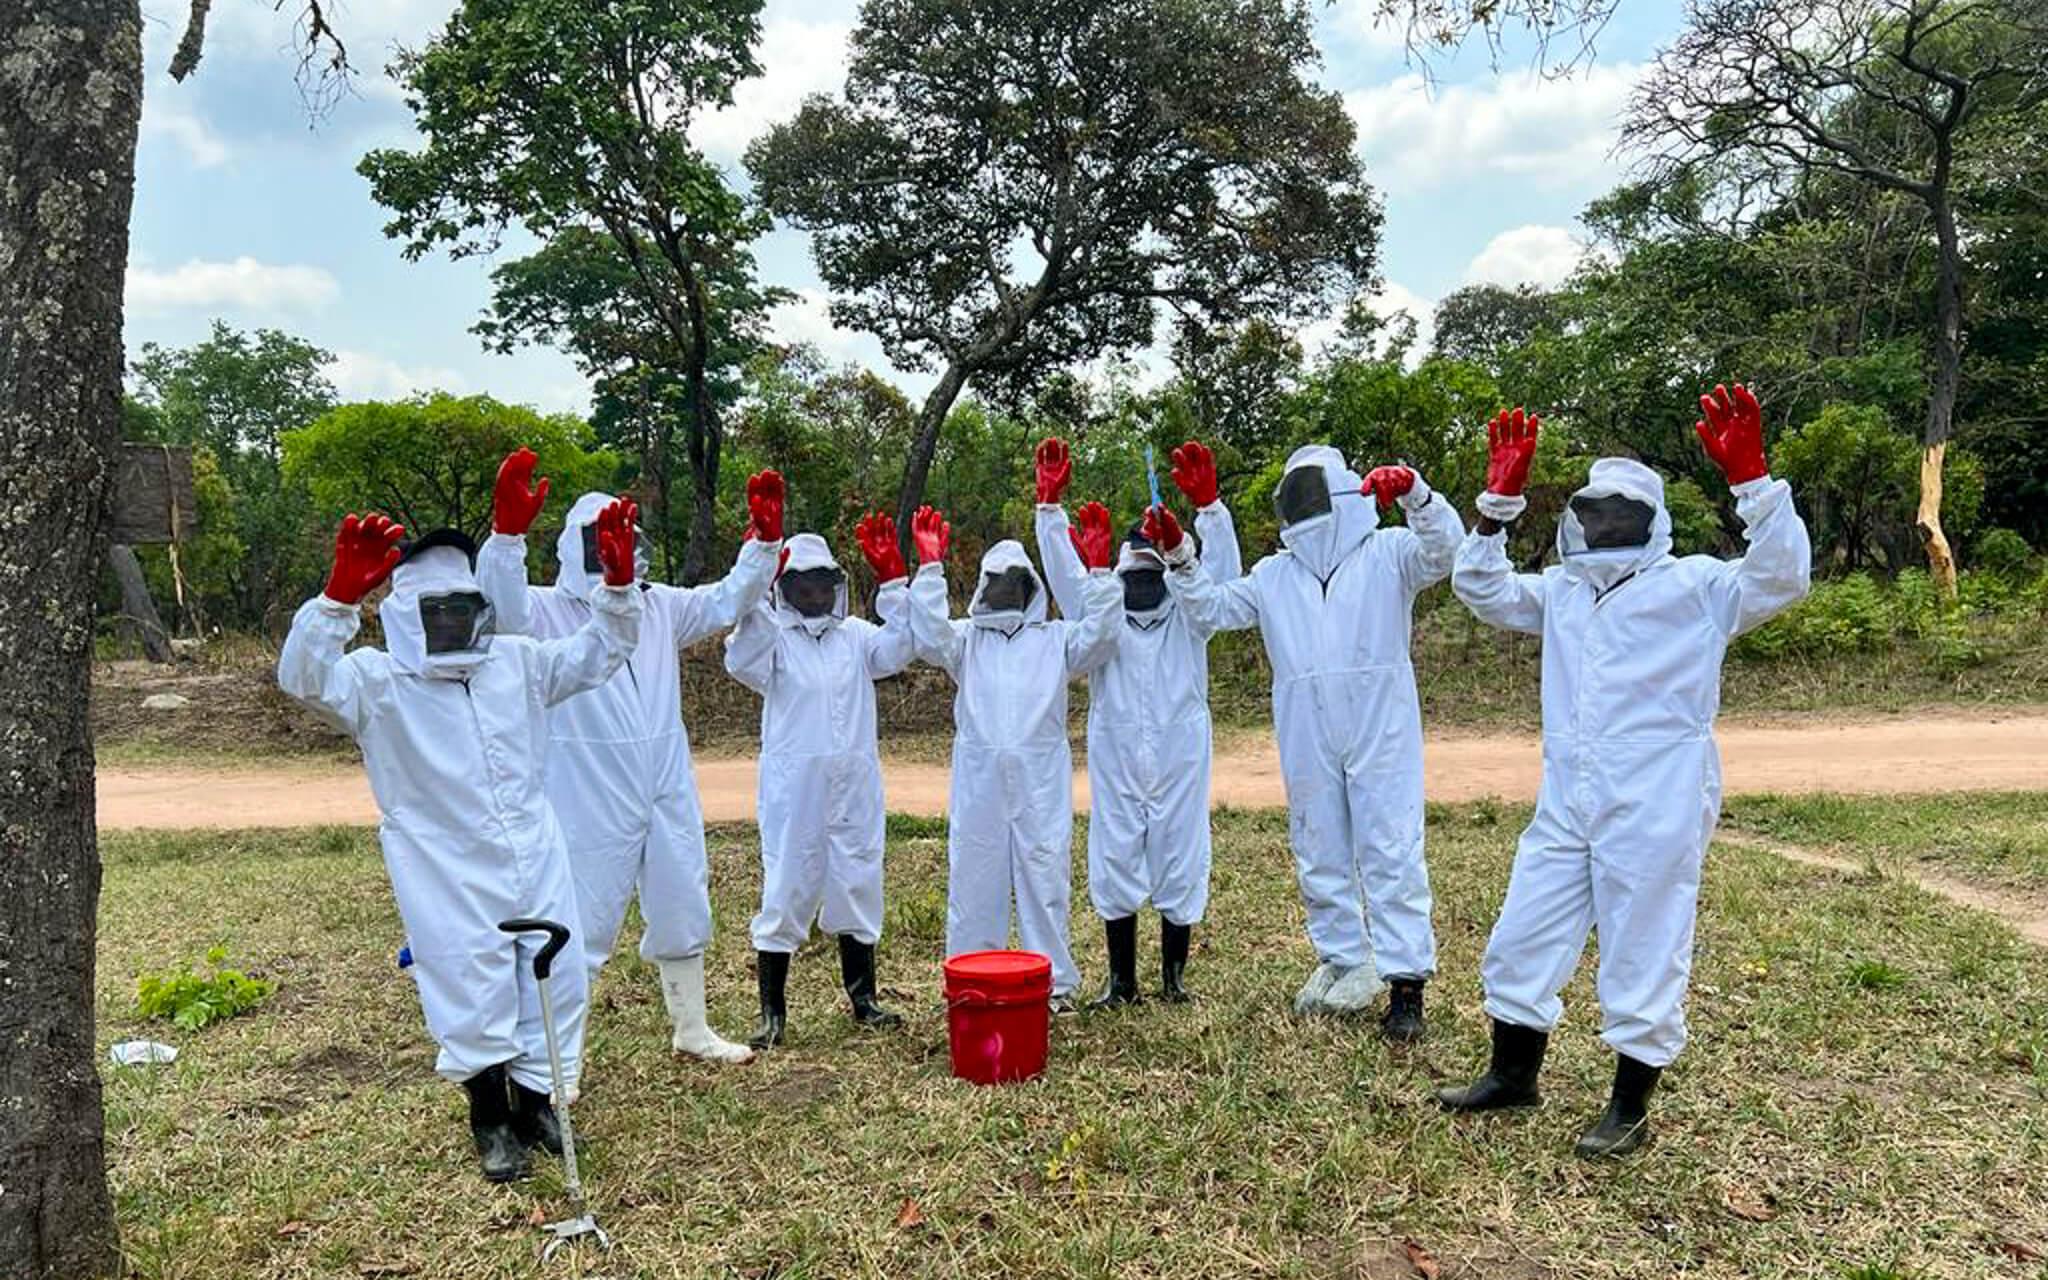 Wuchi Wami empowers local farmers and beekeepers across the community, enabling a sustainable and profitable model for honey production.
Photo: Wuchi Wami